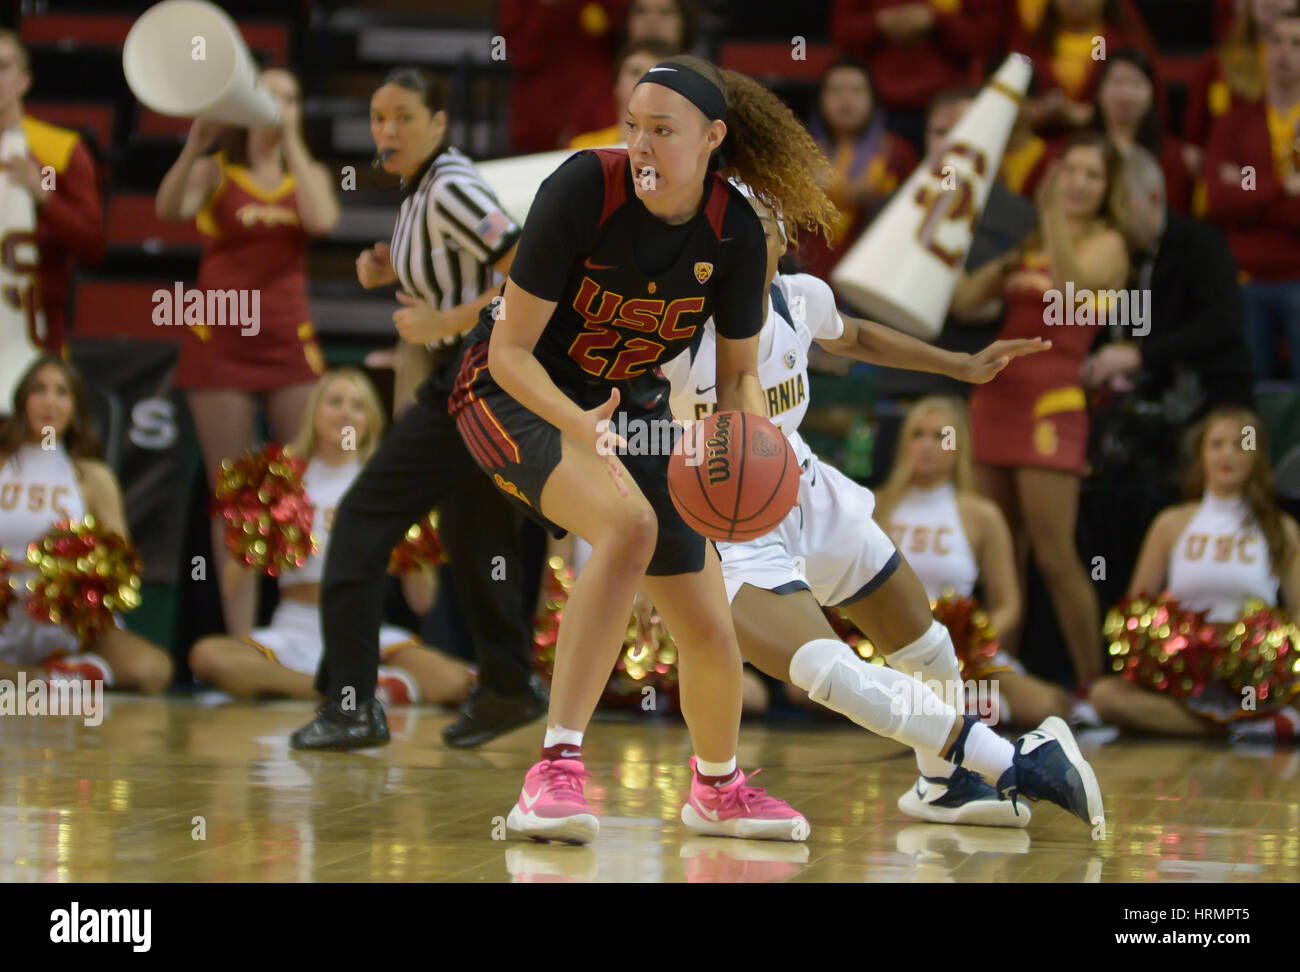 Seattle, WA, USA. 2nd Mar, 2017. during a PAC12 women's tournament game between the Cal Bears and the USC Trojans. The game was played at Key Arena in Seattle, WA. Jeff Halstead/CSM/Alamy Live News Stock Photo